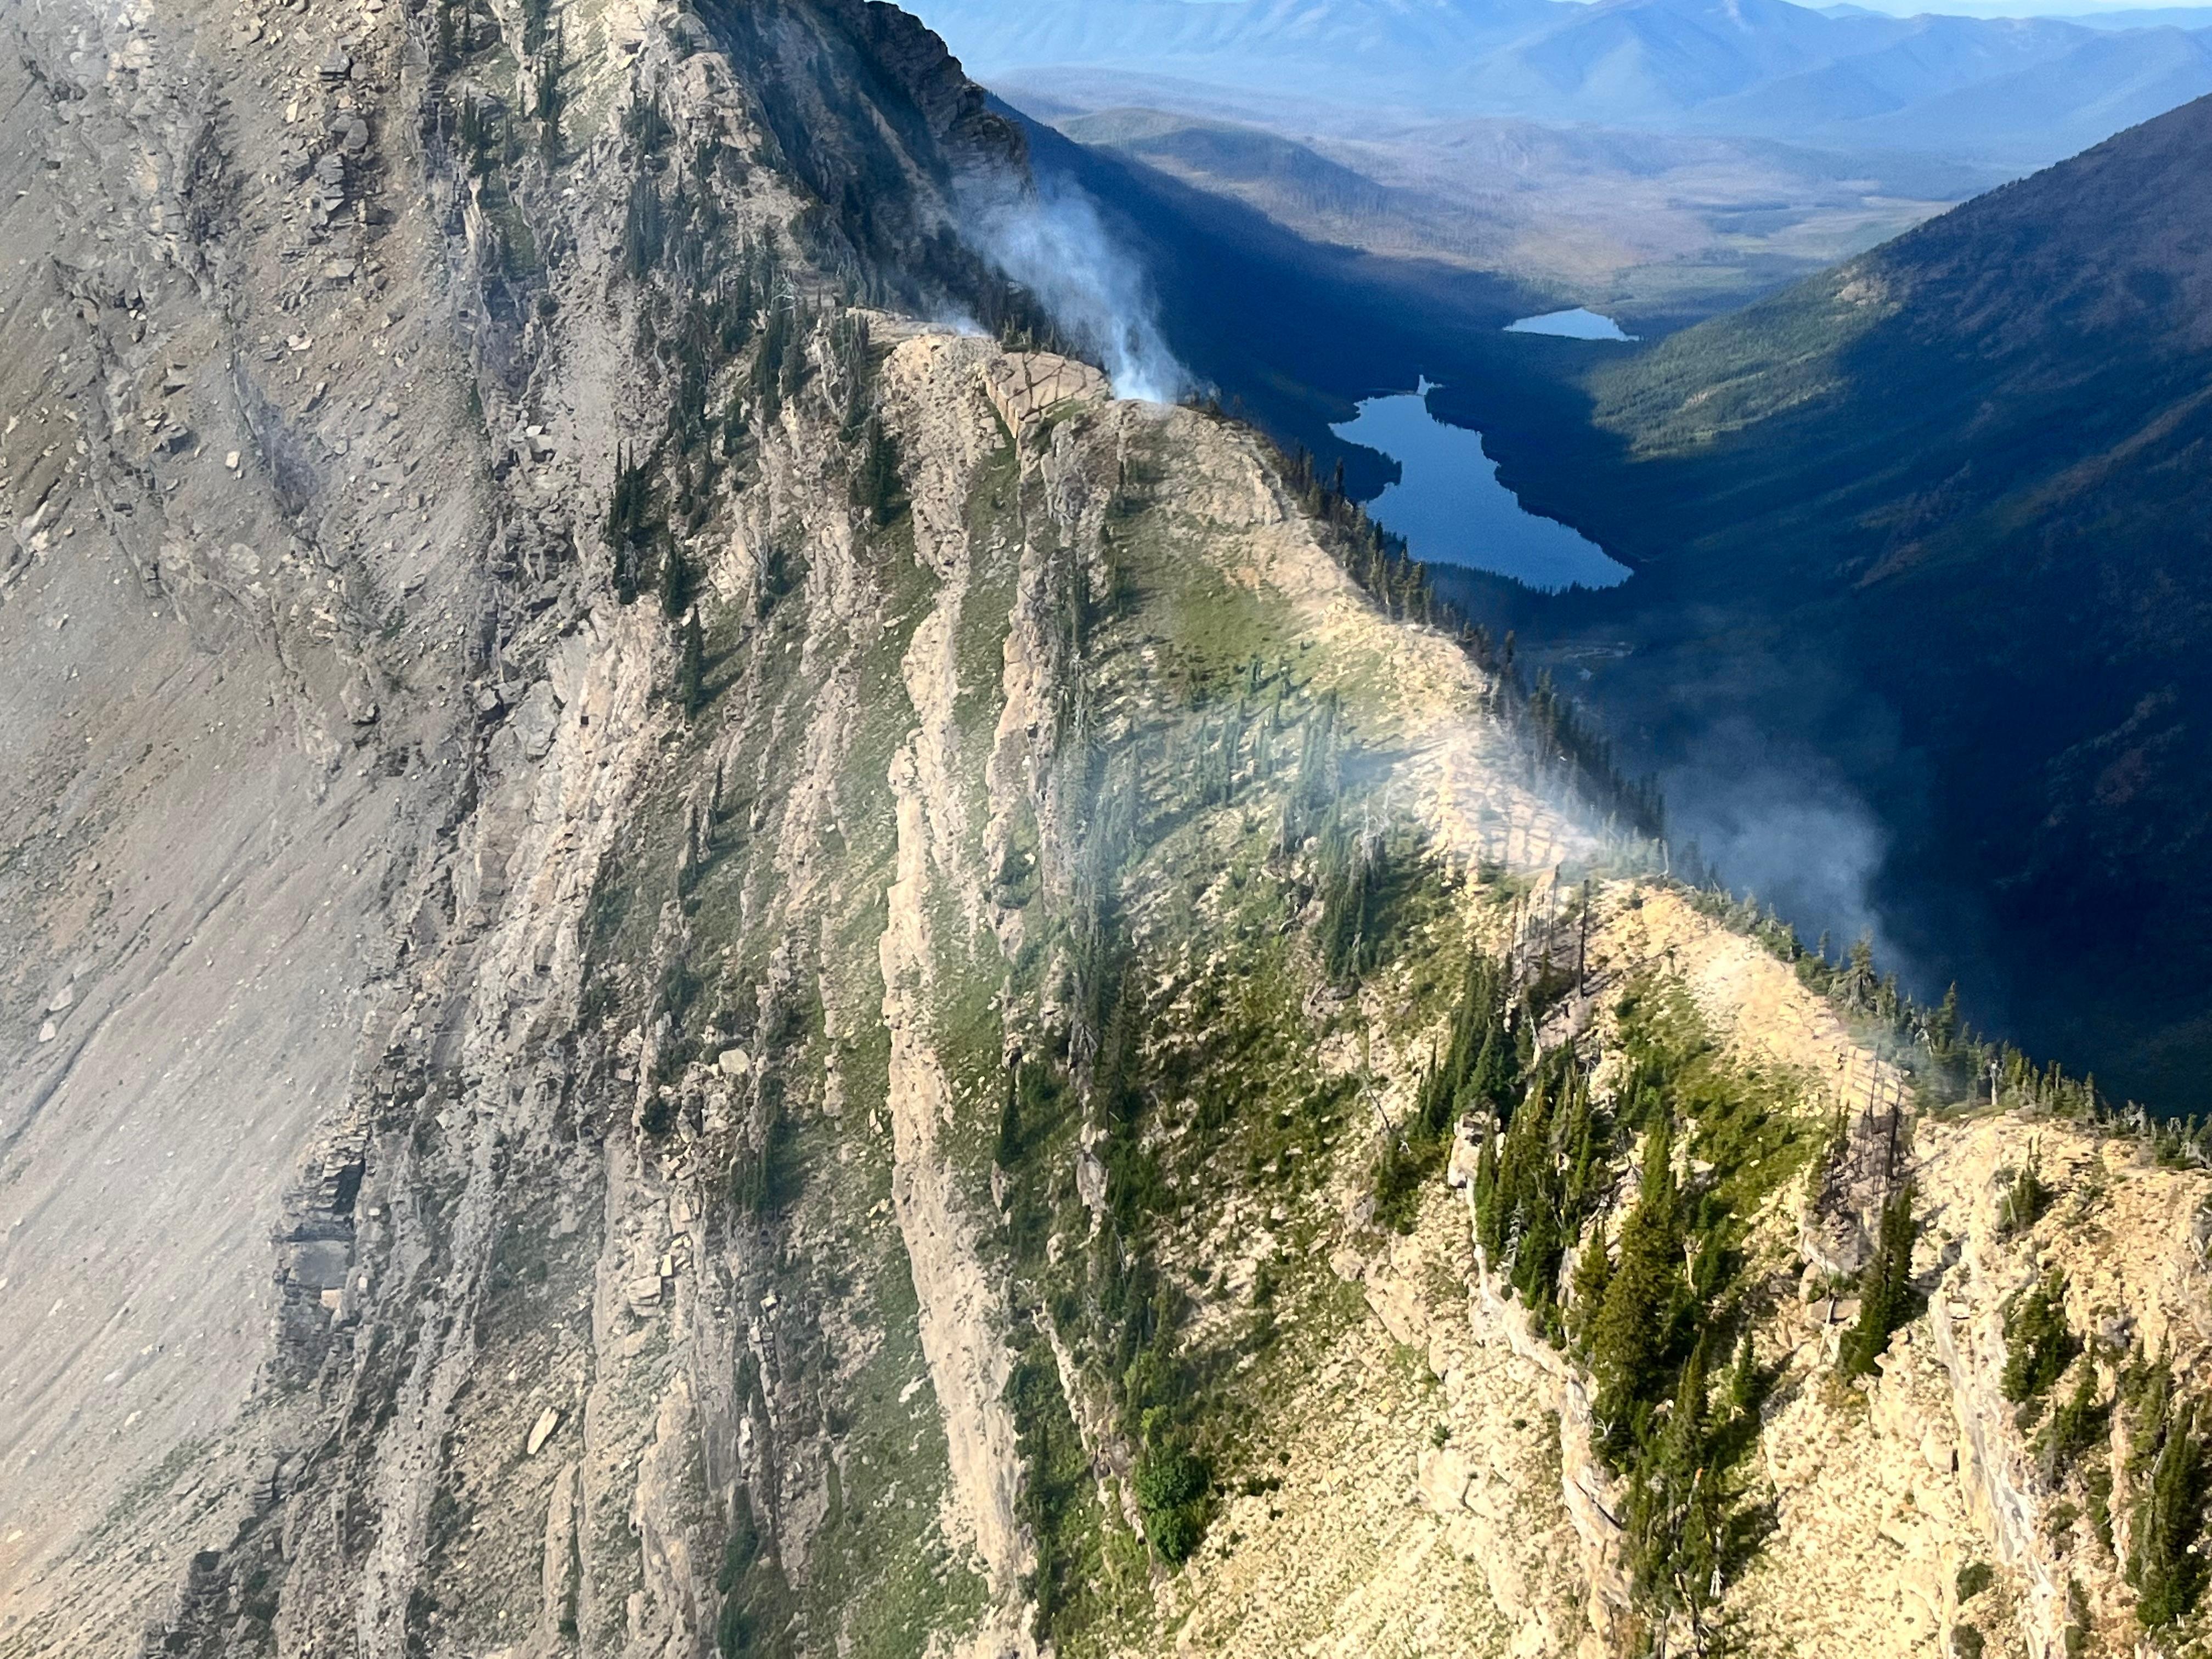 Aerial view of a high elevation rugged peak with small wisps of smoke coming from the ridge. Two lakes visible in the distance.